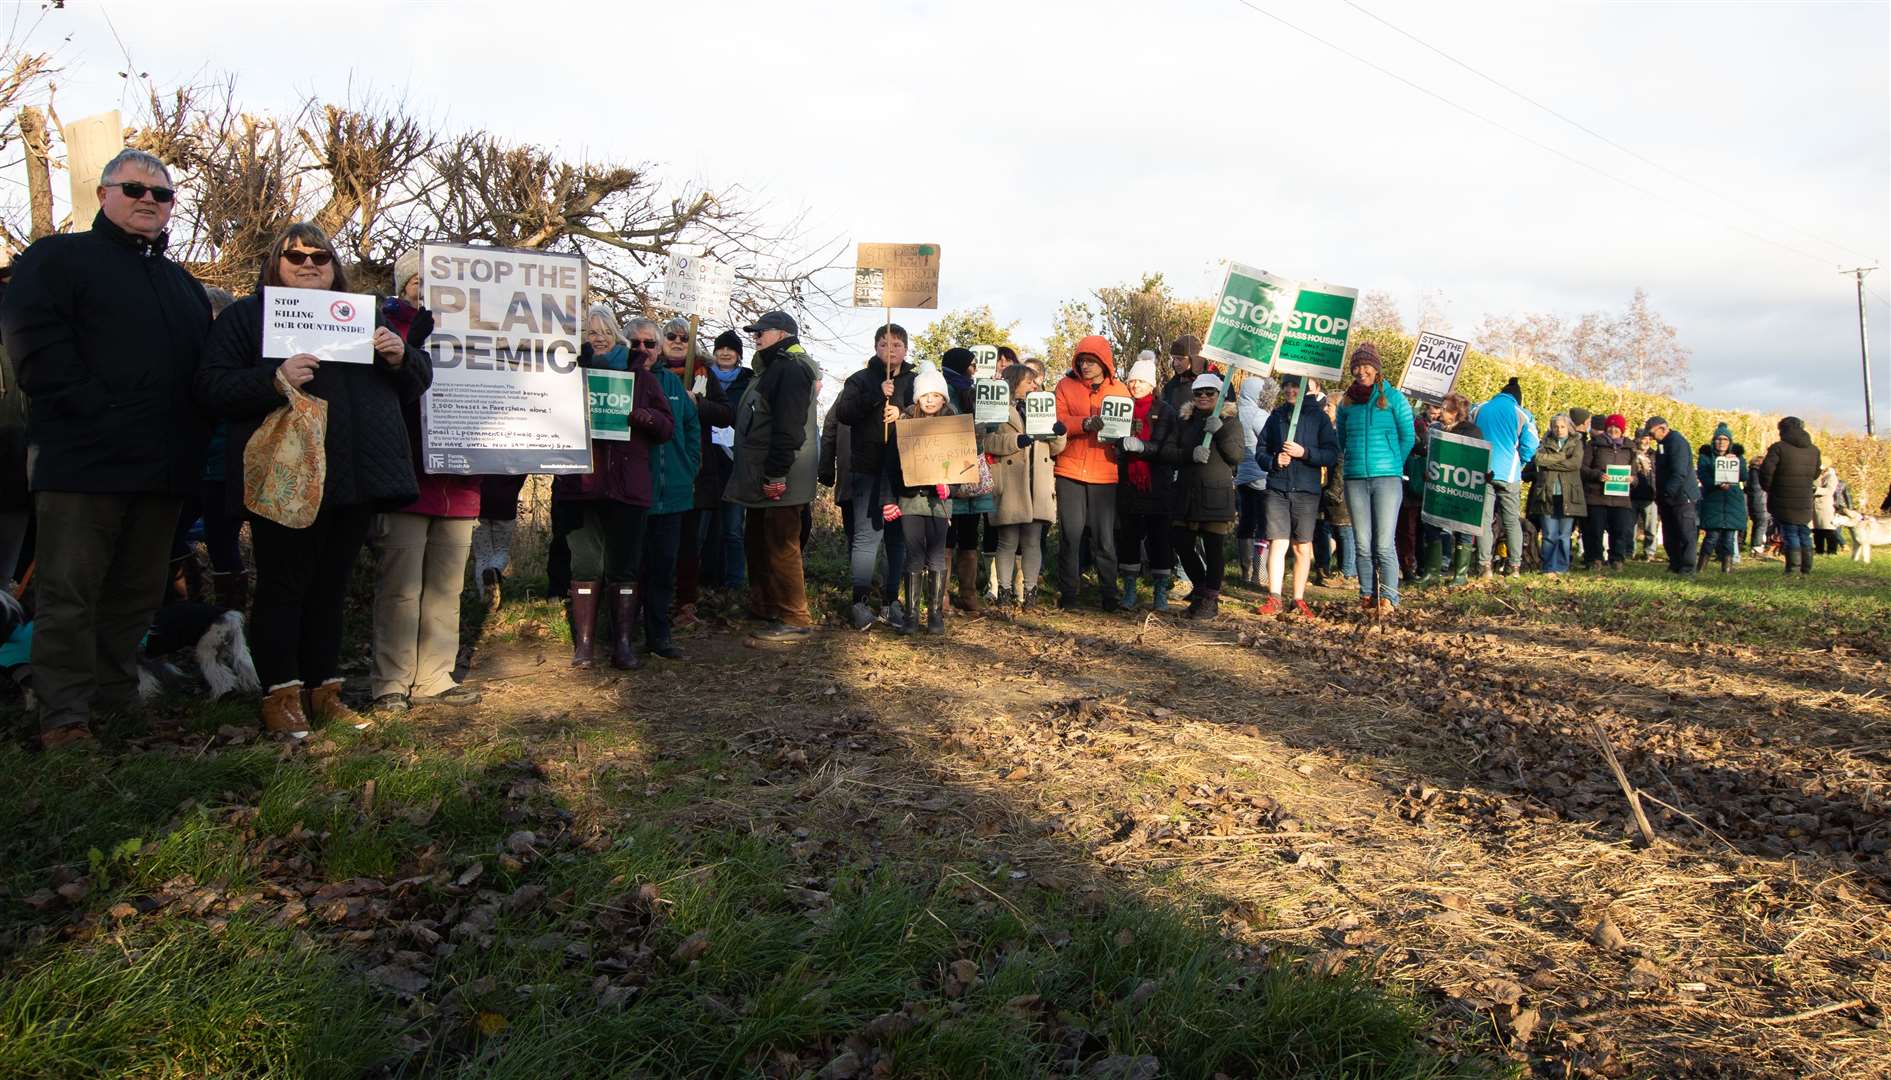 Fields and Fresh Air Faversham protestors. Picture: Tilly Bayes